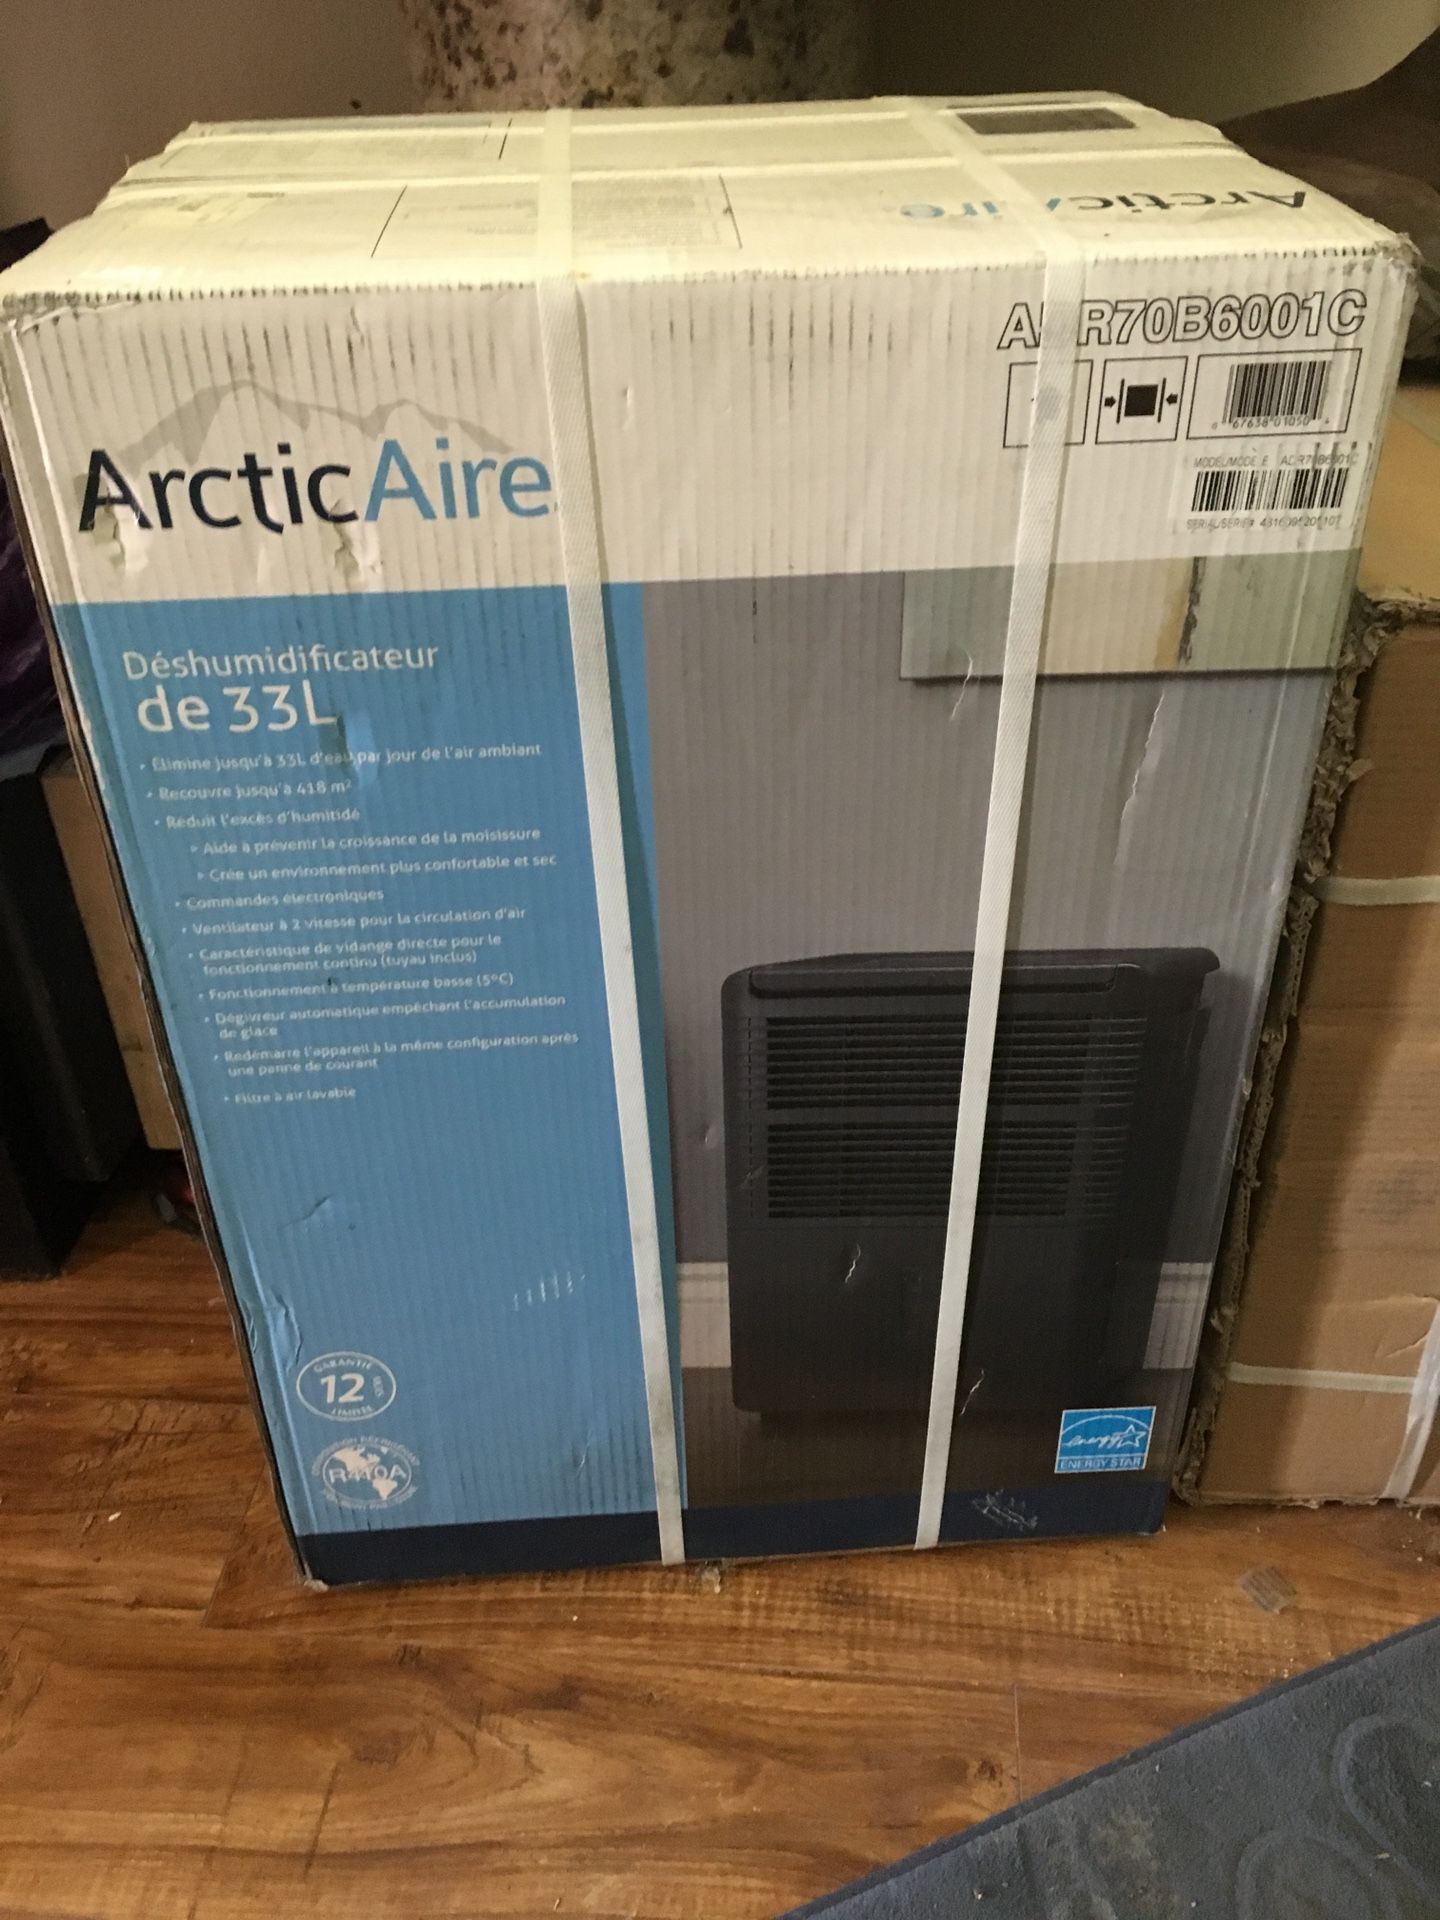 Brand new in box Danby dehumidifier 70 pint. Arctic aire